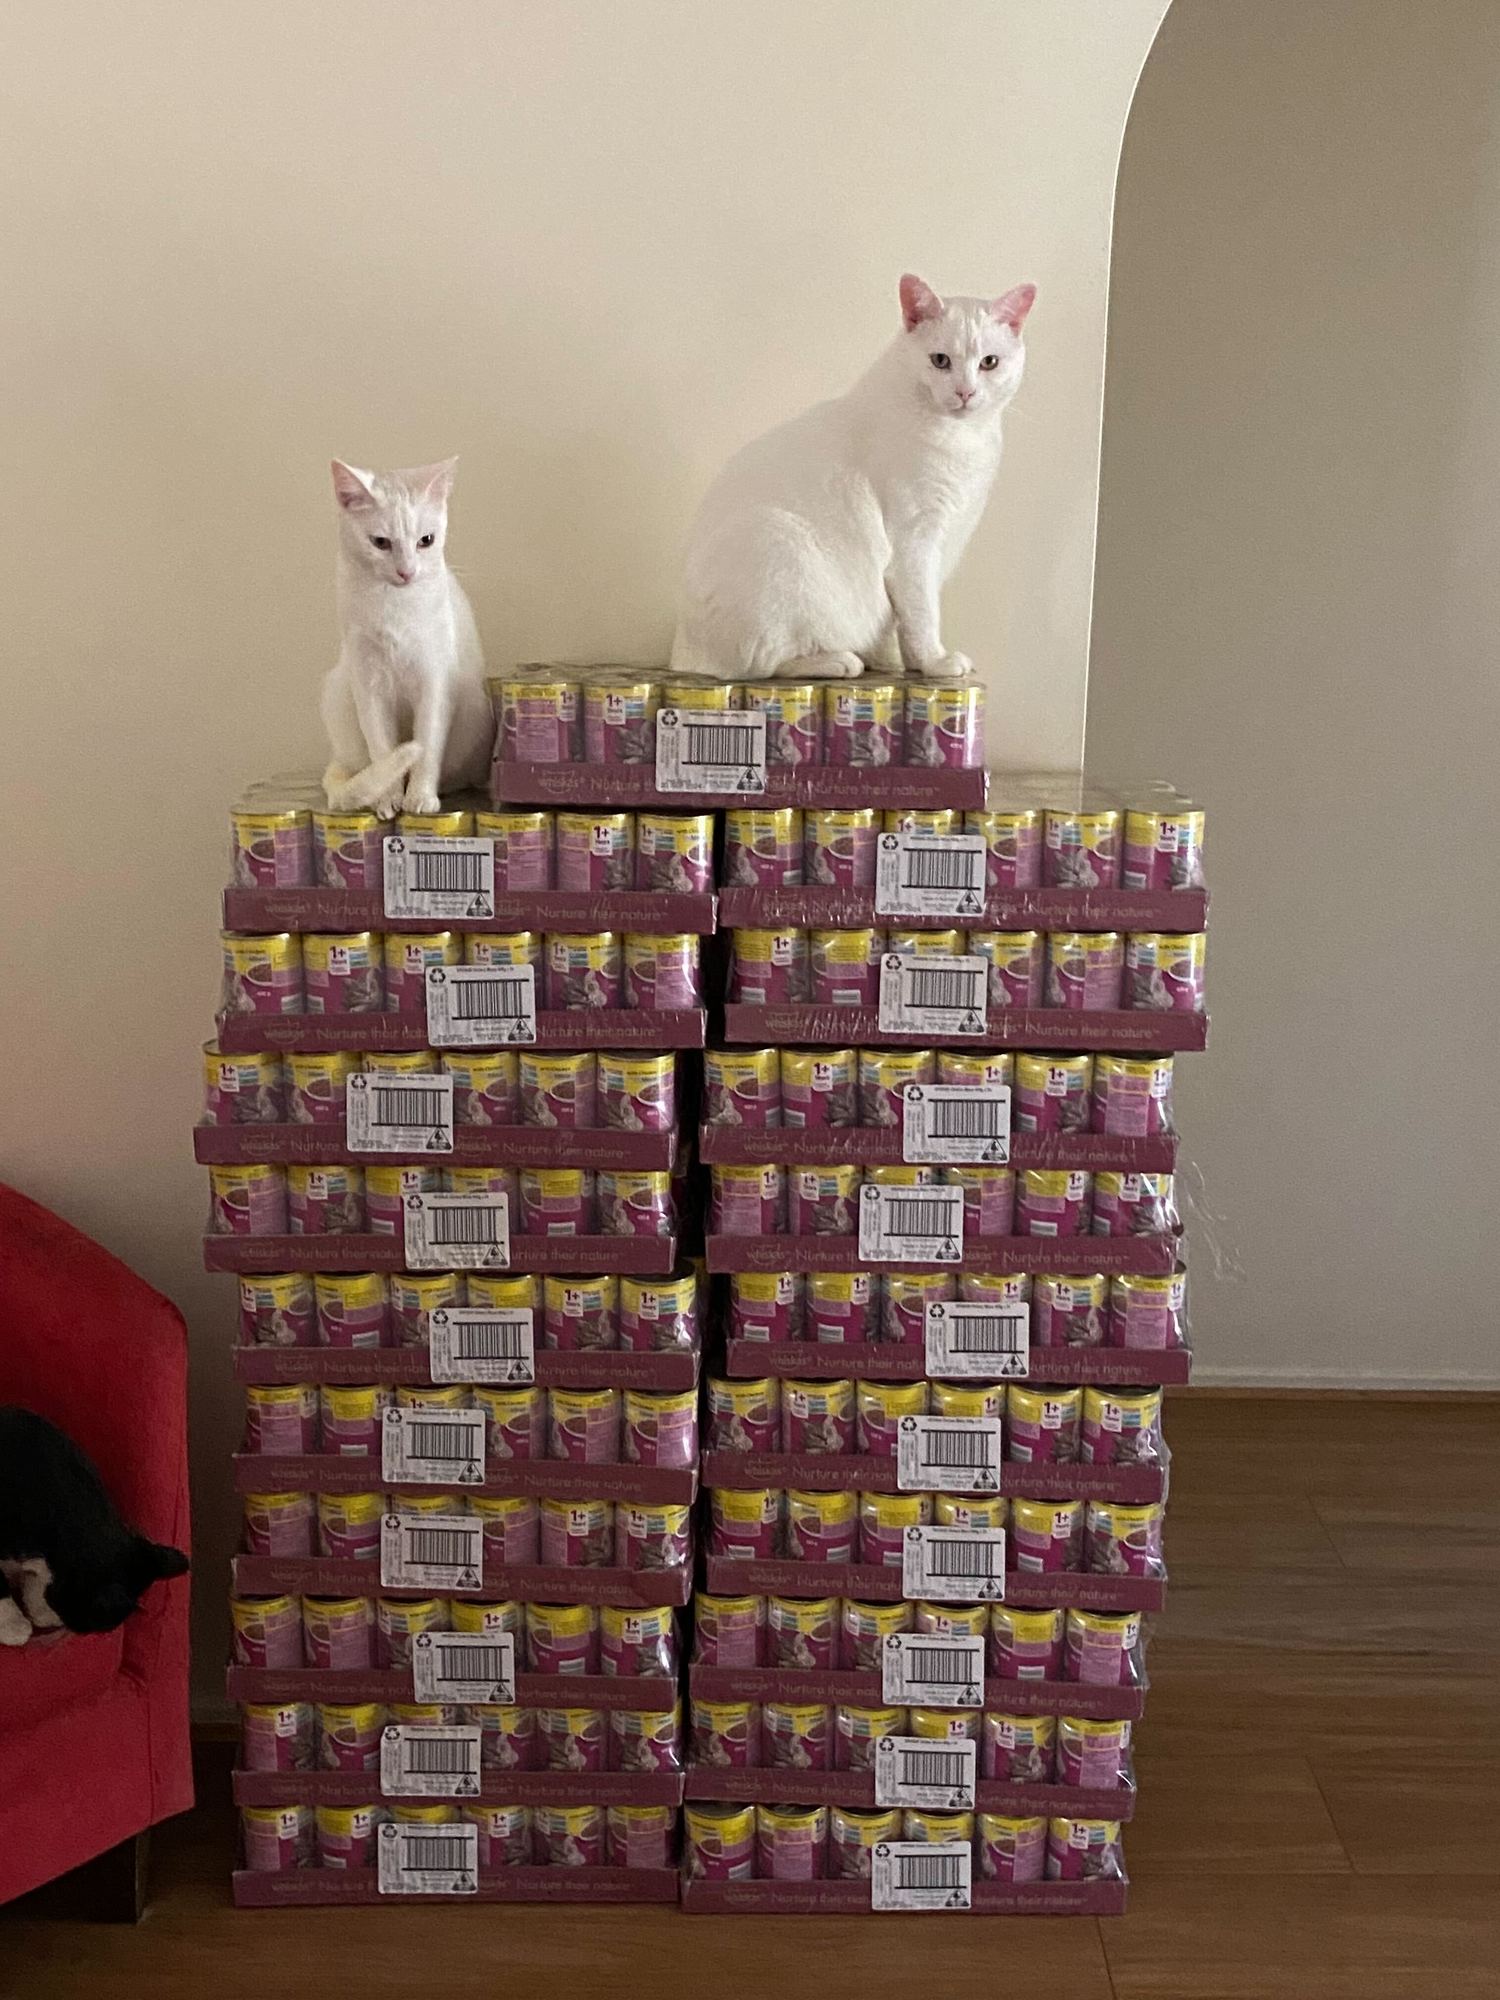 Two white cats sitting on the top of tinned Whiskas cat food